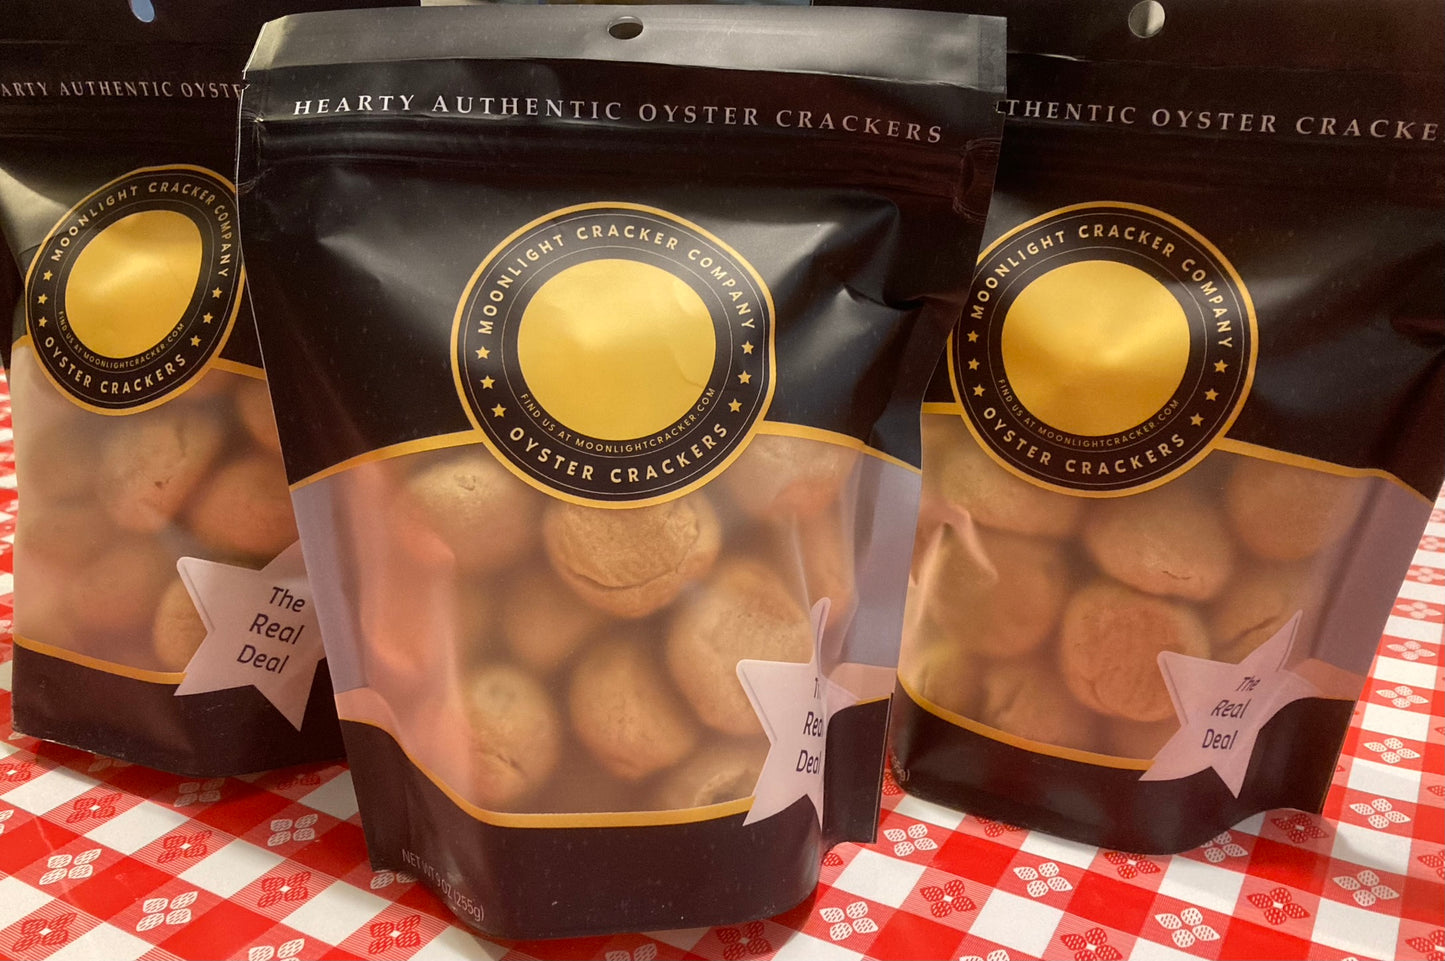 1 - 9 oz (approx) Bag of Original Style Oyster Crackers (24 crackers)